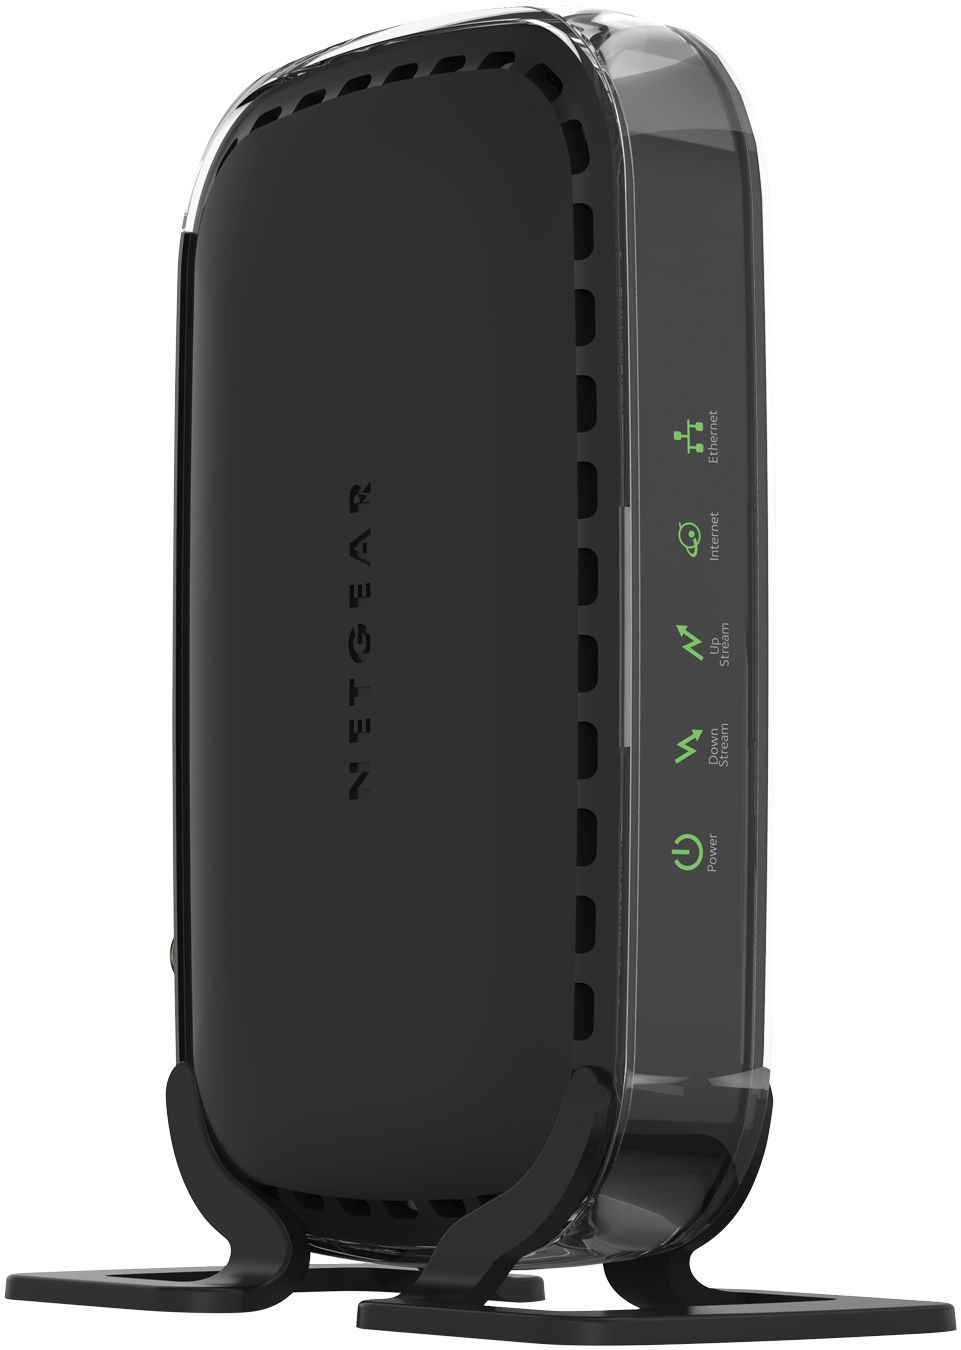 NETGEAR CM400 (8x4) Cable Modem (No WiFi), DOCSIS 3.0 | Certified for XFINITY by Comcast, Spectrum, Cox, Cablevision & more (CM400-100NAS)